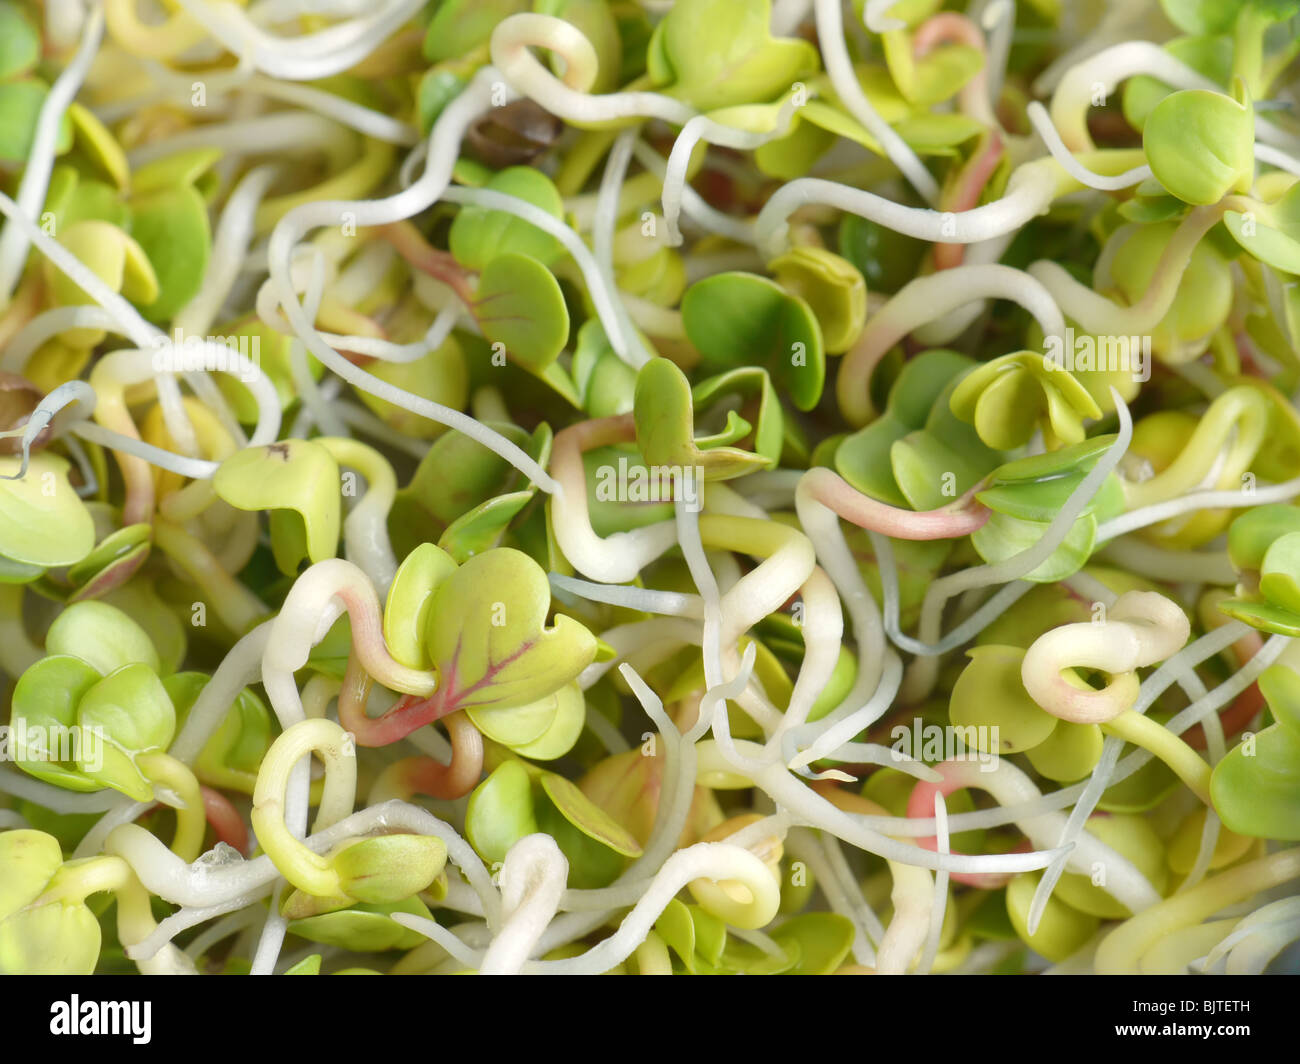 Bunch of fresh radish sprouts shot from above Stock Photo